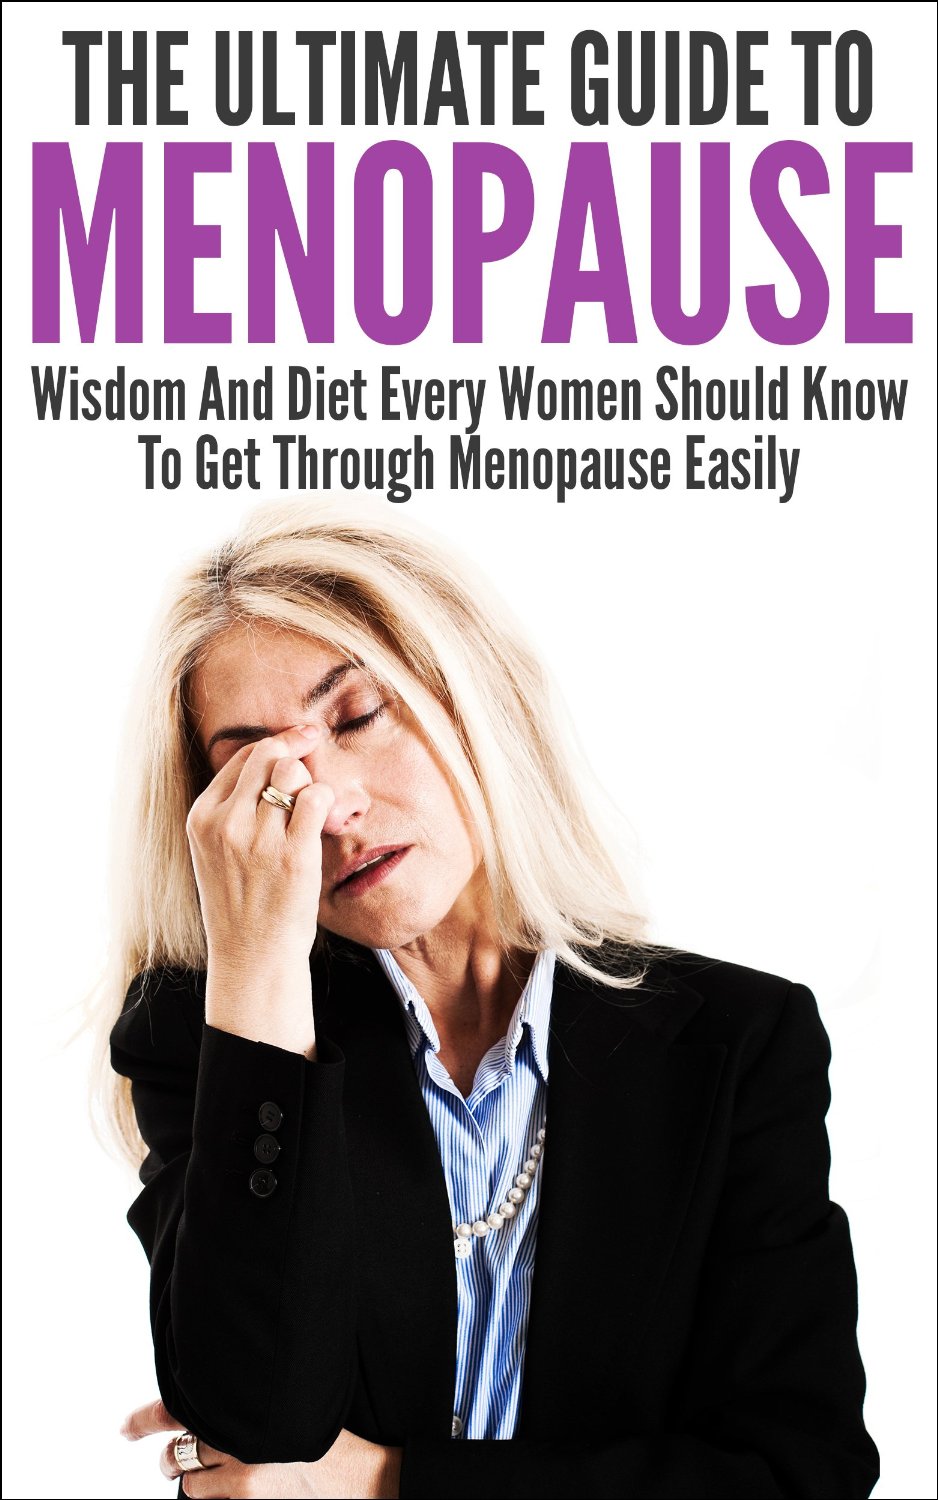 The Ultimate Guide To Menopause: Wisdom And Diet Every Women Should Know To Get Through Menopause Easily  by Elizabeth Grace